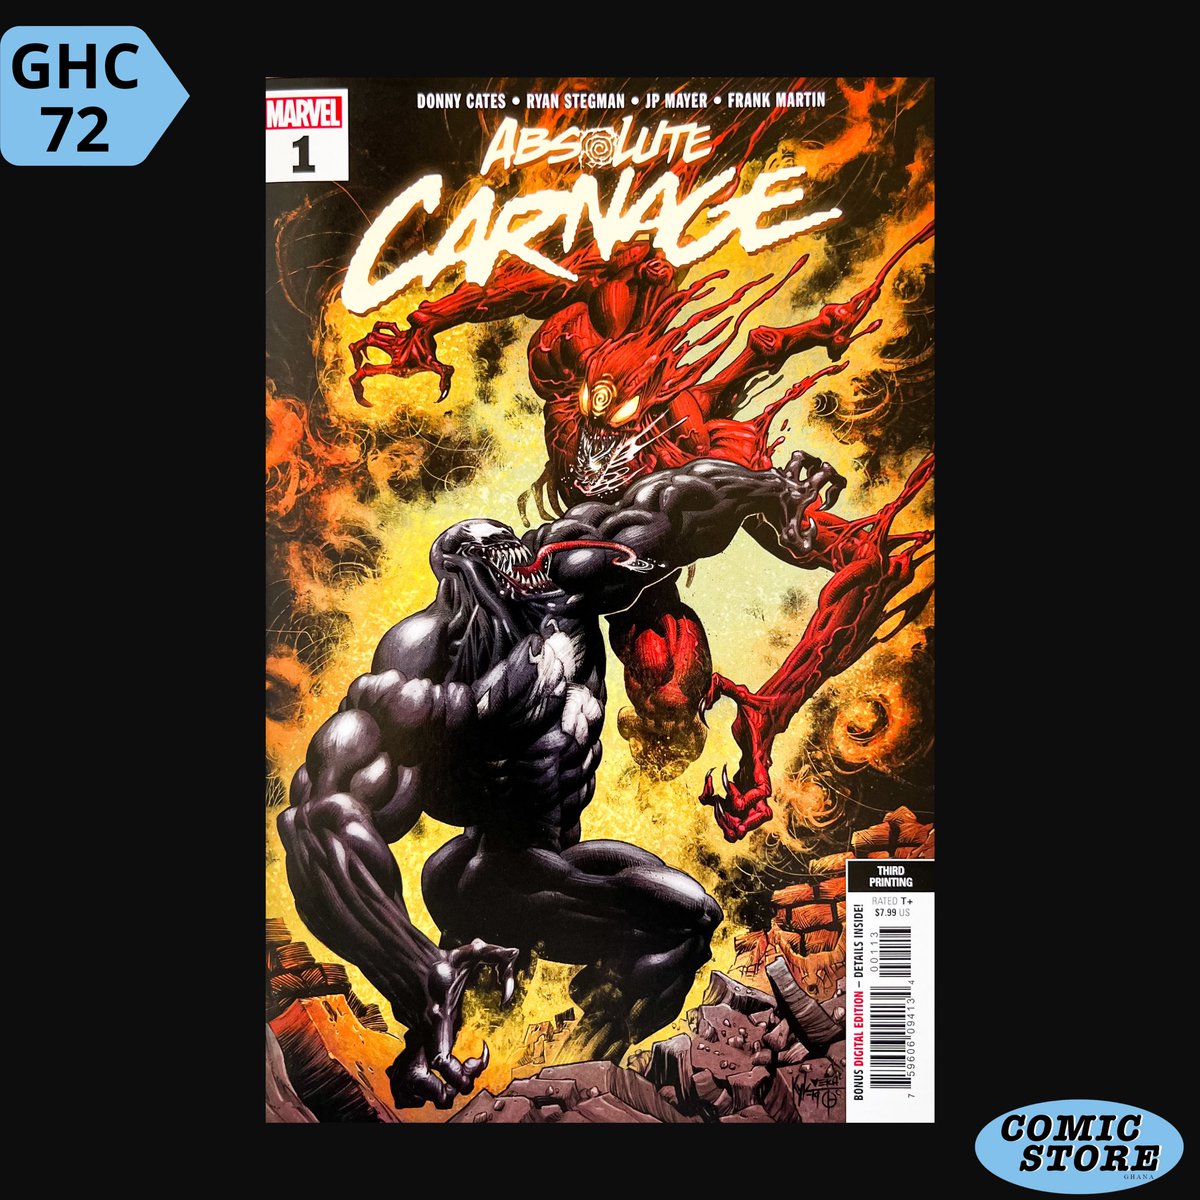 MARVEL : ABSOLUTE CARNAGE
Issue No. : 1

Order via DM or the WhatsApp link or the website link in the description.
#ghana #marvel #comics #accra #marvelcomics #manga #africa #dc #dccomics #marvel #mcu #marvelcarnage #venom #spiderman #absolutecarnage